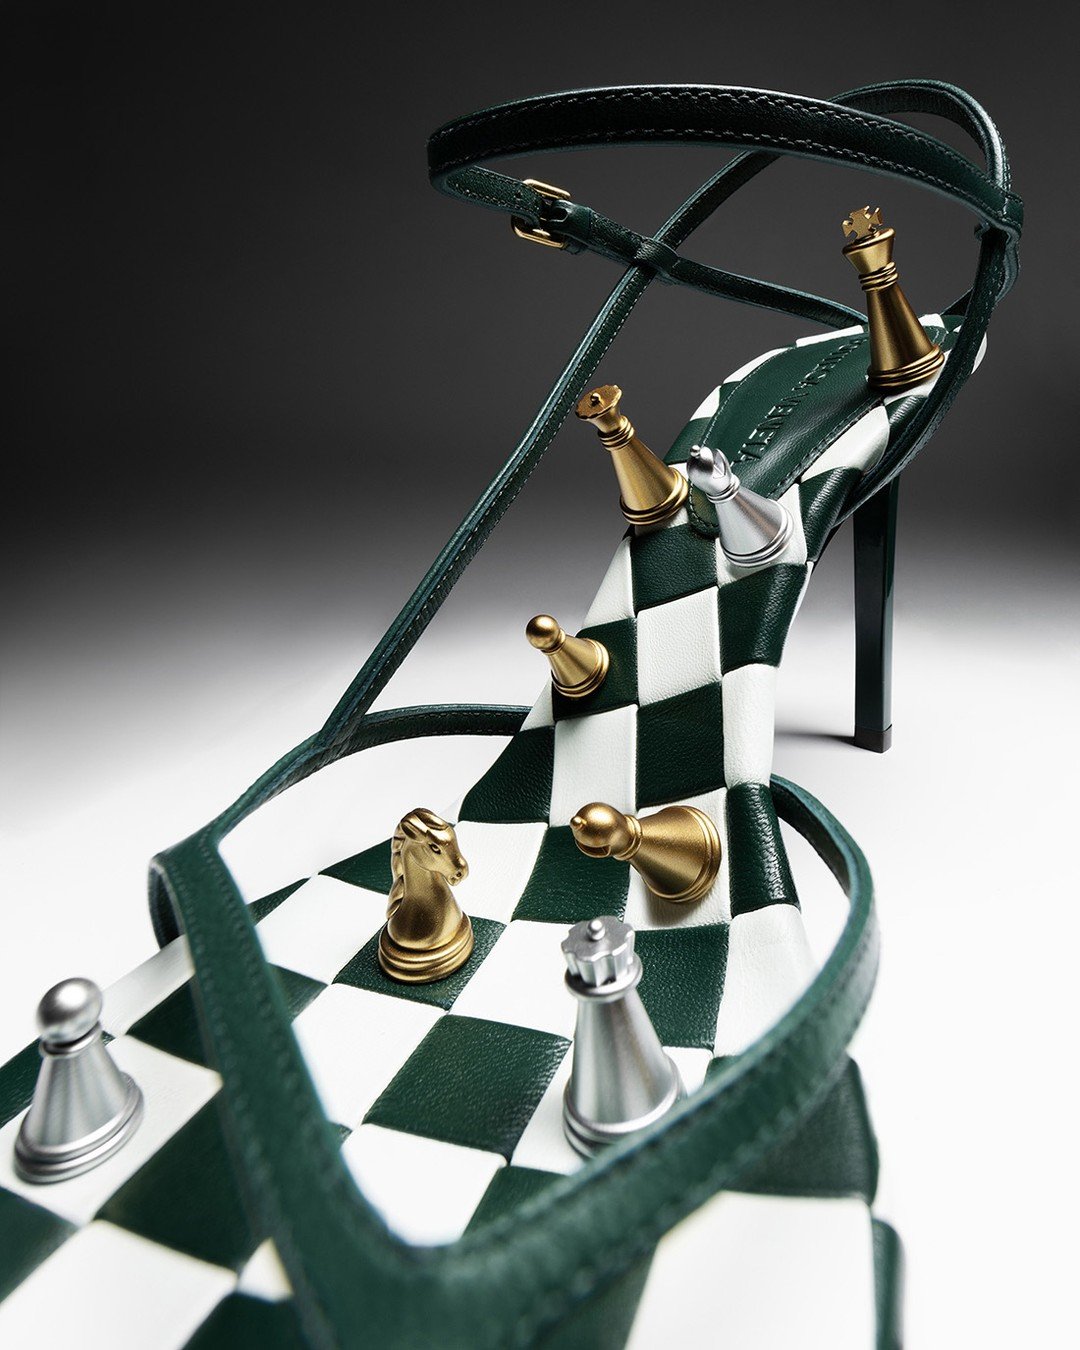 Checkmate.

Creative/art direction, set design, prop styling, lighting, photography, and retouching by me